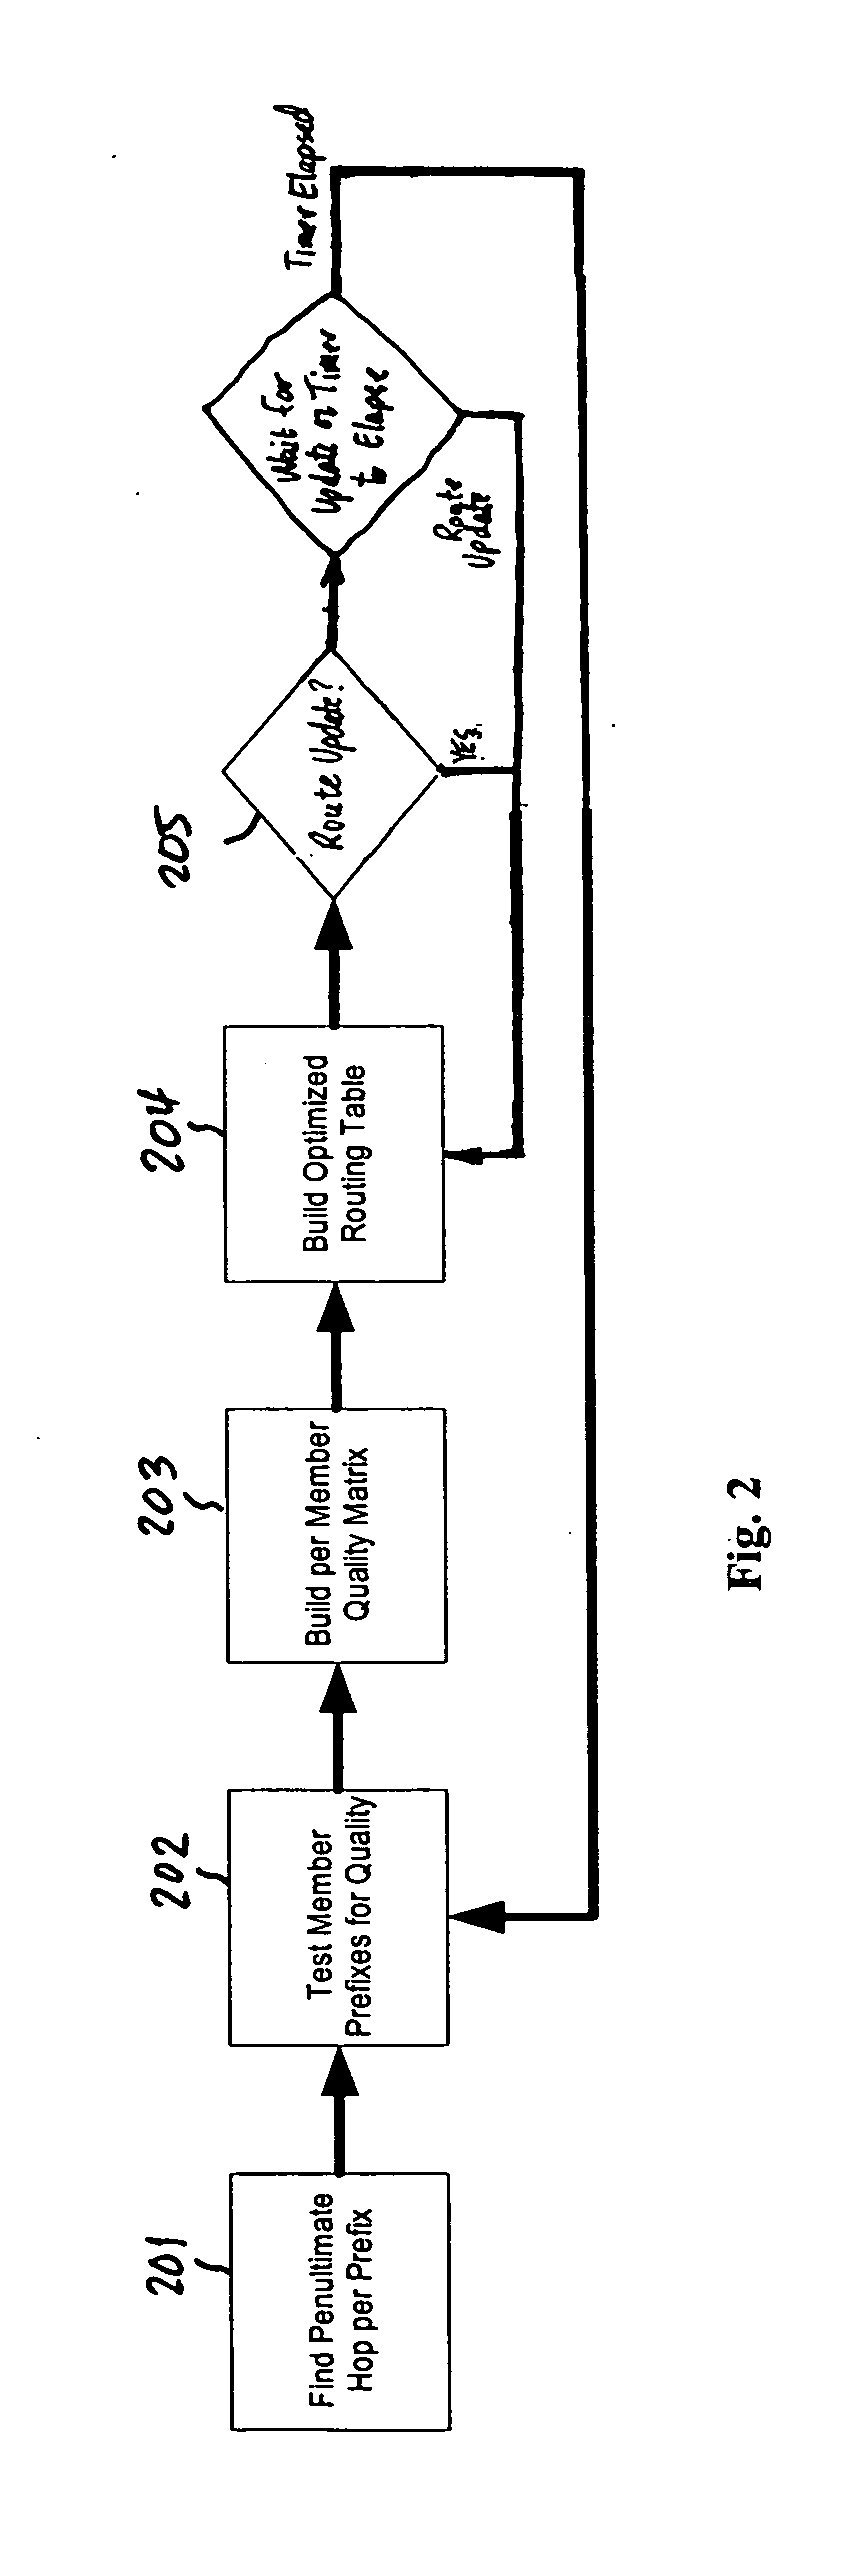 IP exchange quality testing system and method